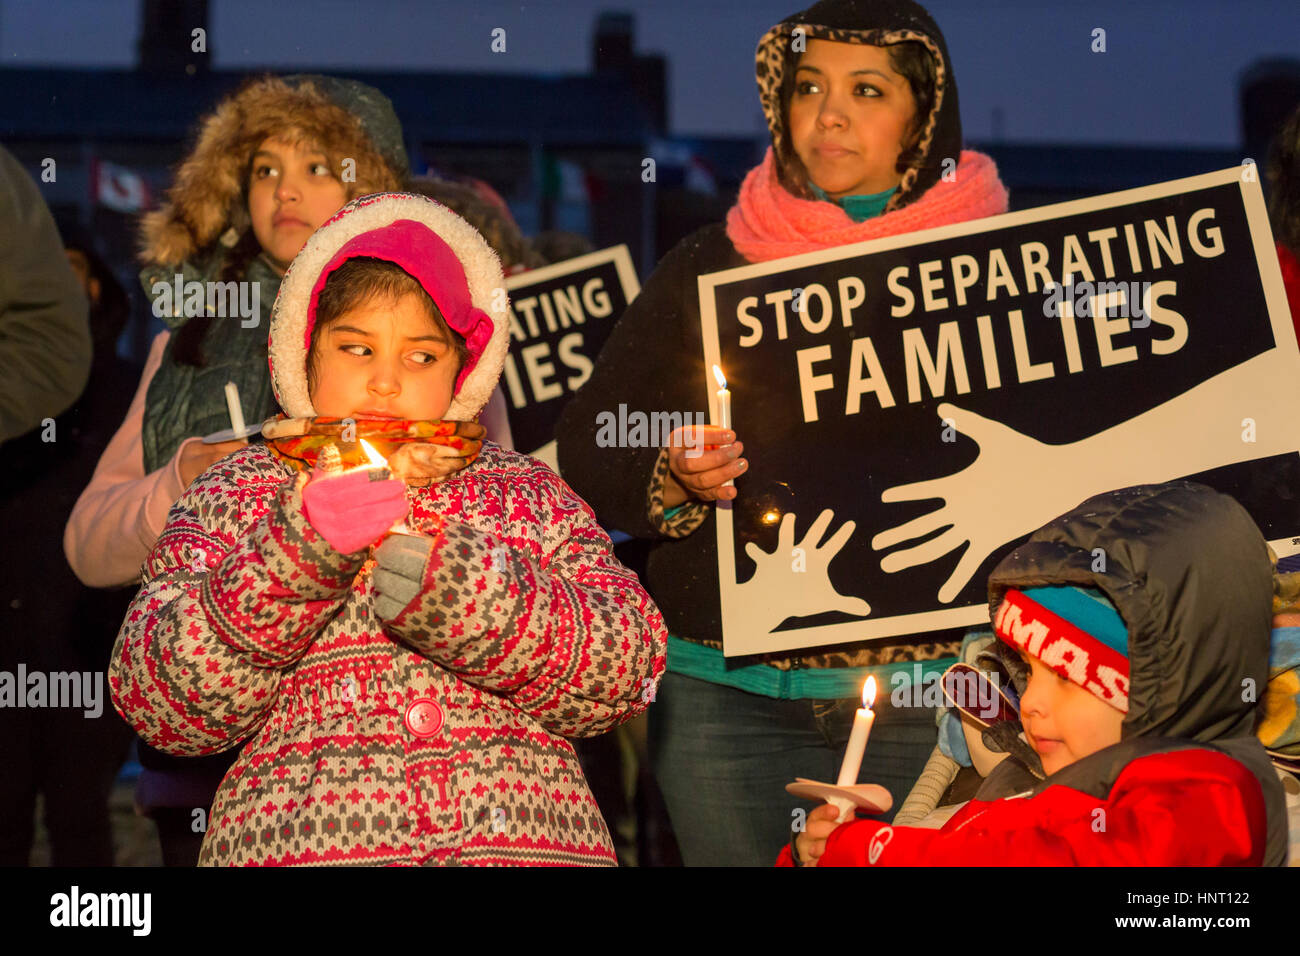 Detroit, Michigan, USA. 15th February 2017. People rally outside Western International High School against deportations of immigrants and against plans to expand the wall on the Mexican border. The vigil was organized by a coalition of Muslim, Jewish, and Hispanic organizations. Credit: Jim West/Alamy Live News Stock Photo